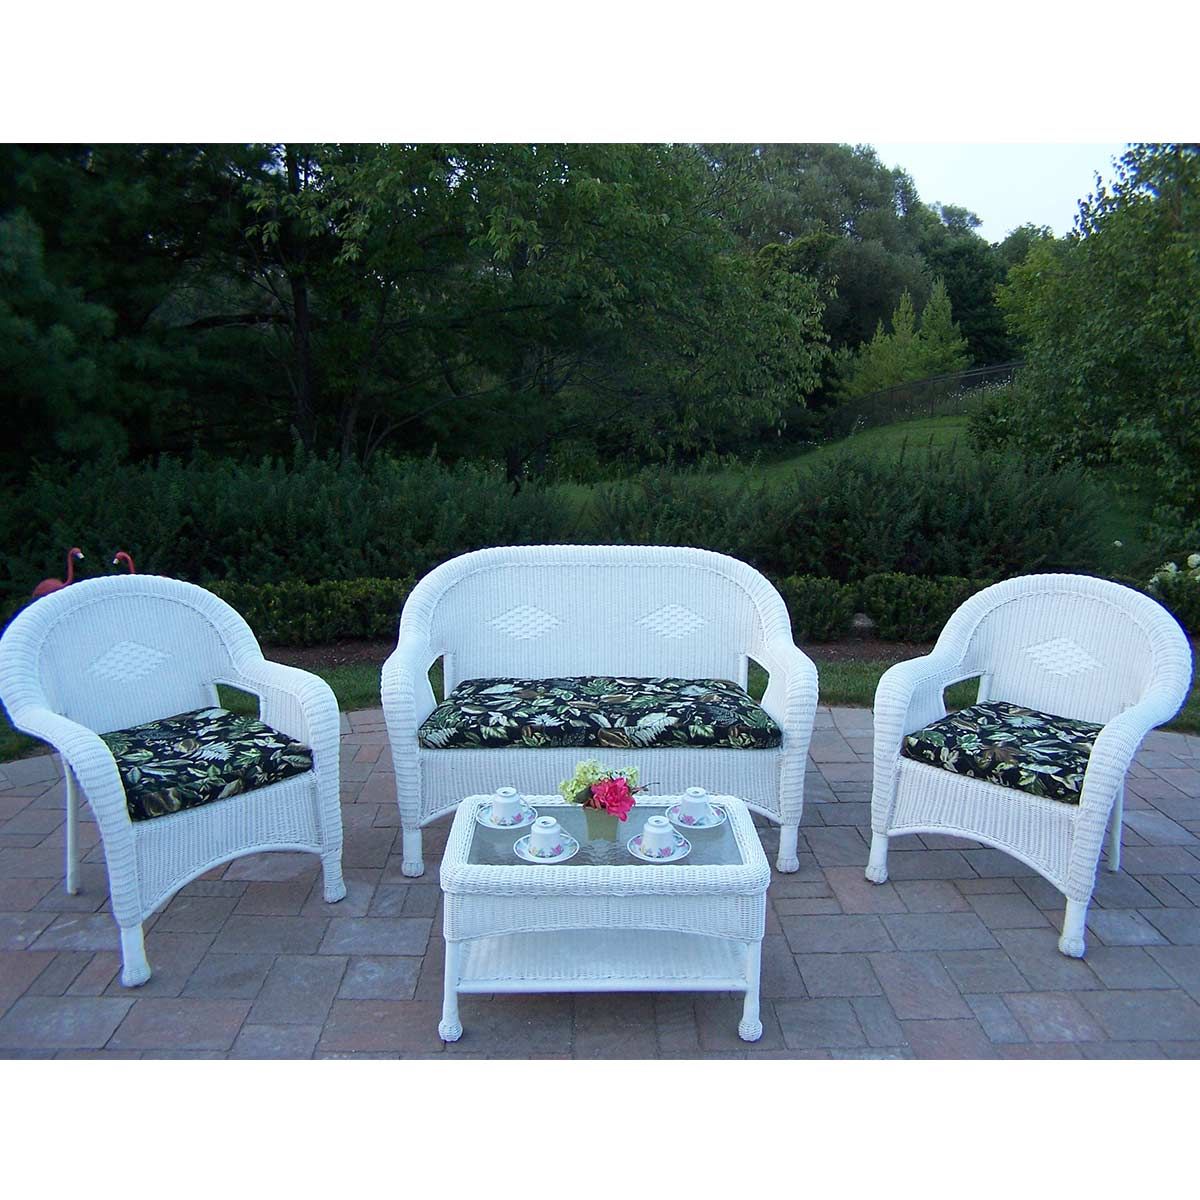 Oakland Living Resin Wicker 4 Piece Patio Seating Set With Cushioned Regarding 4 Piece Outdoor Seating Patio Sets (View 15 of 15)